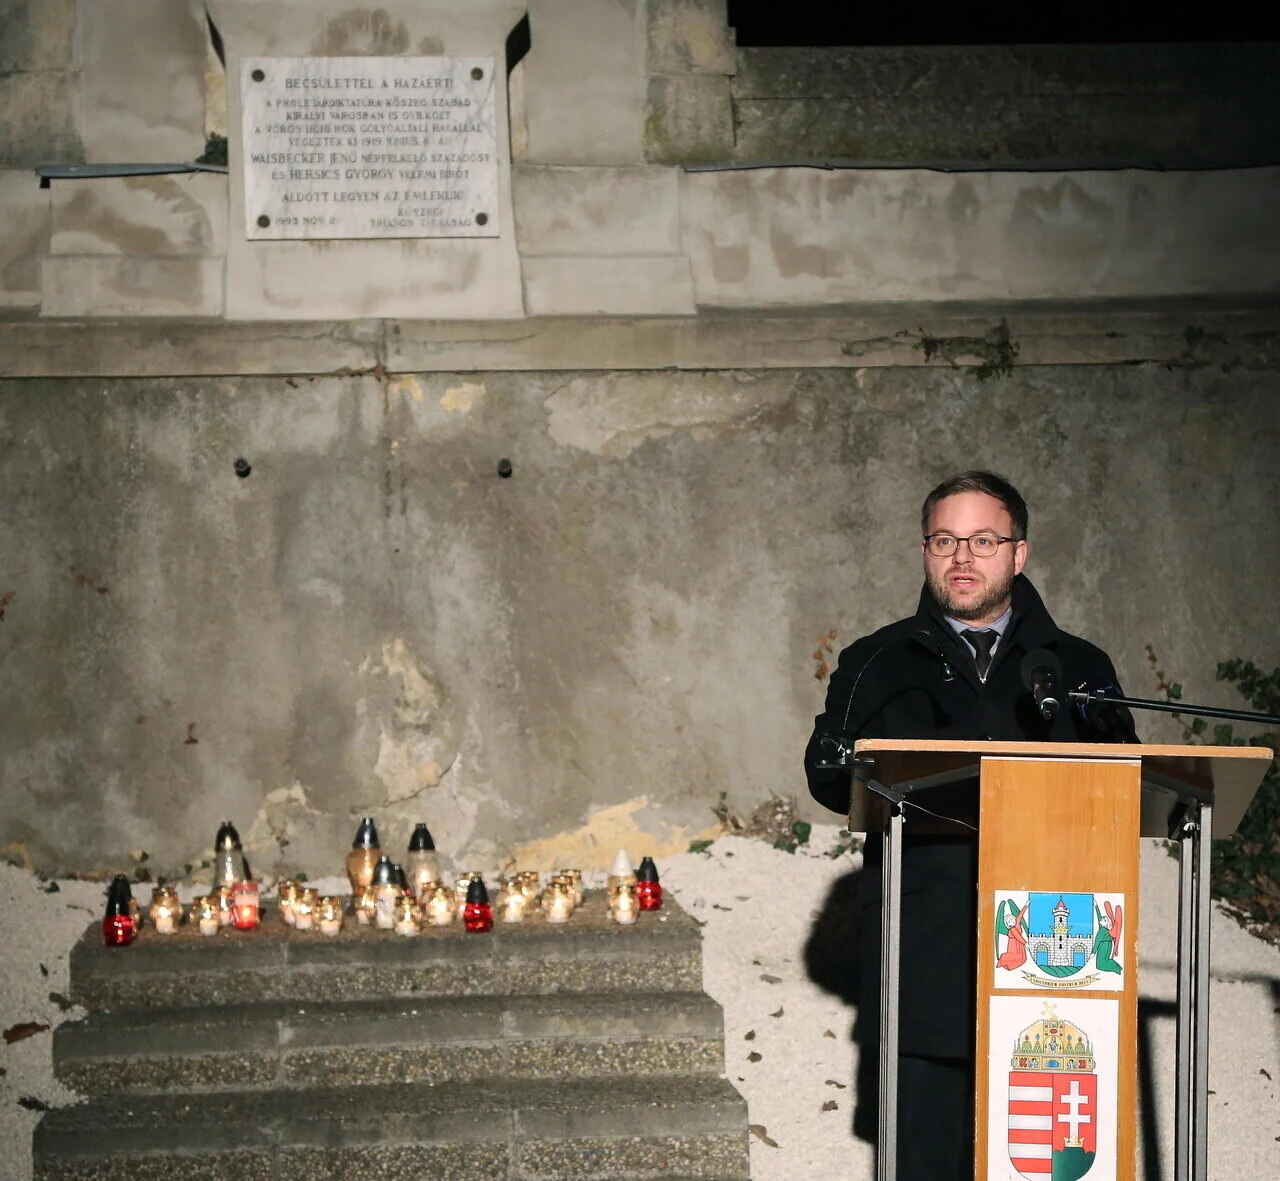 Victims of Communism memorial day in Hungary